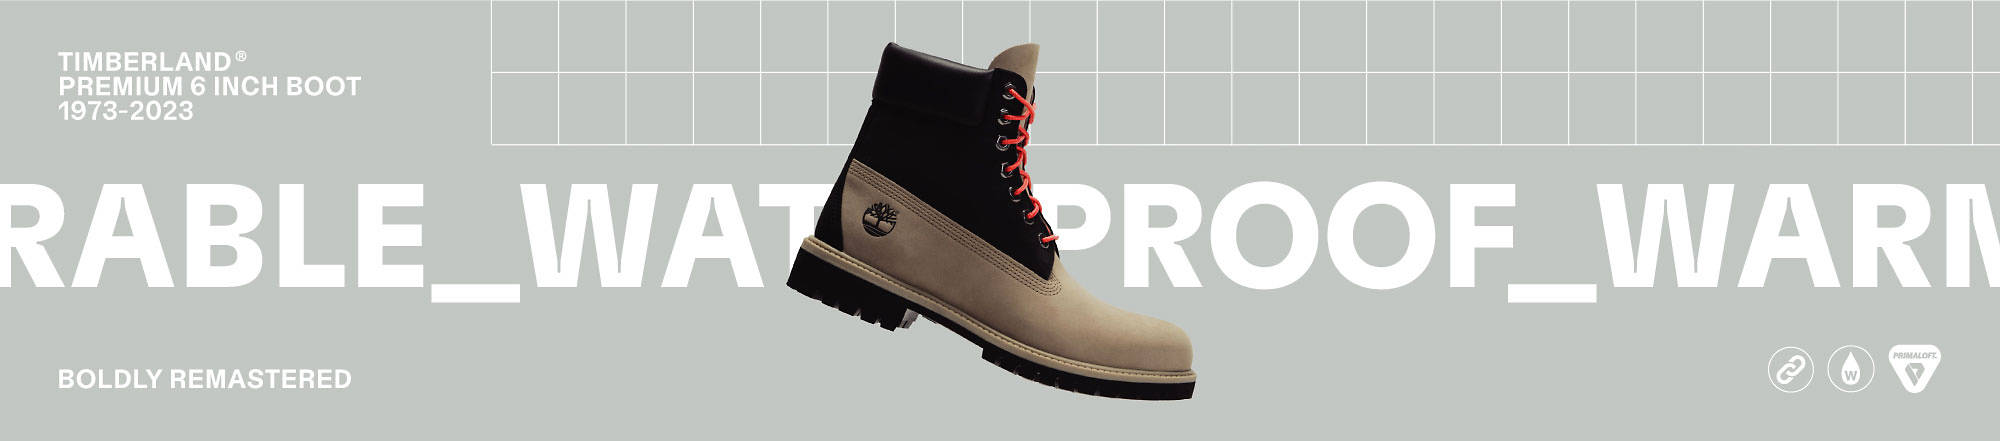 Image of a Timberland Premium 6 Inch Boot in a tan and black colorway with orange/red laces. Text behind the boot says Timberland Premium 6 Inch Boot 1973 - 2023. Additional text reads: 'Durable', 'Waterproof', 'Warm', 'Boldly Remastered'